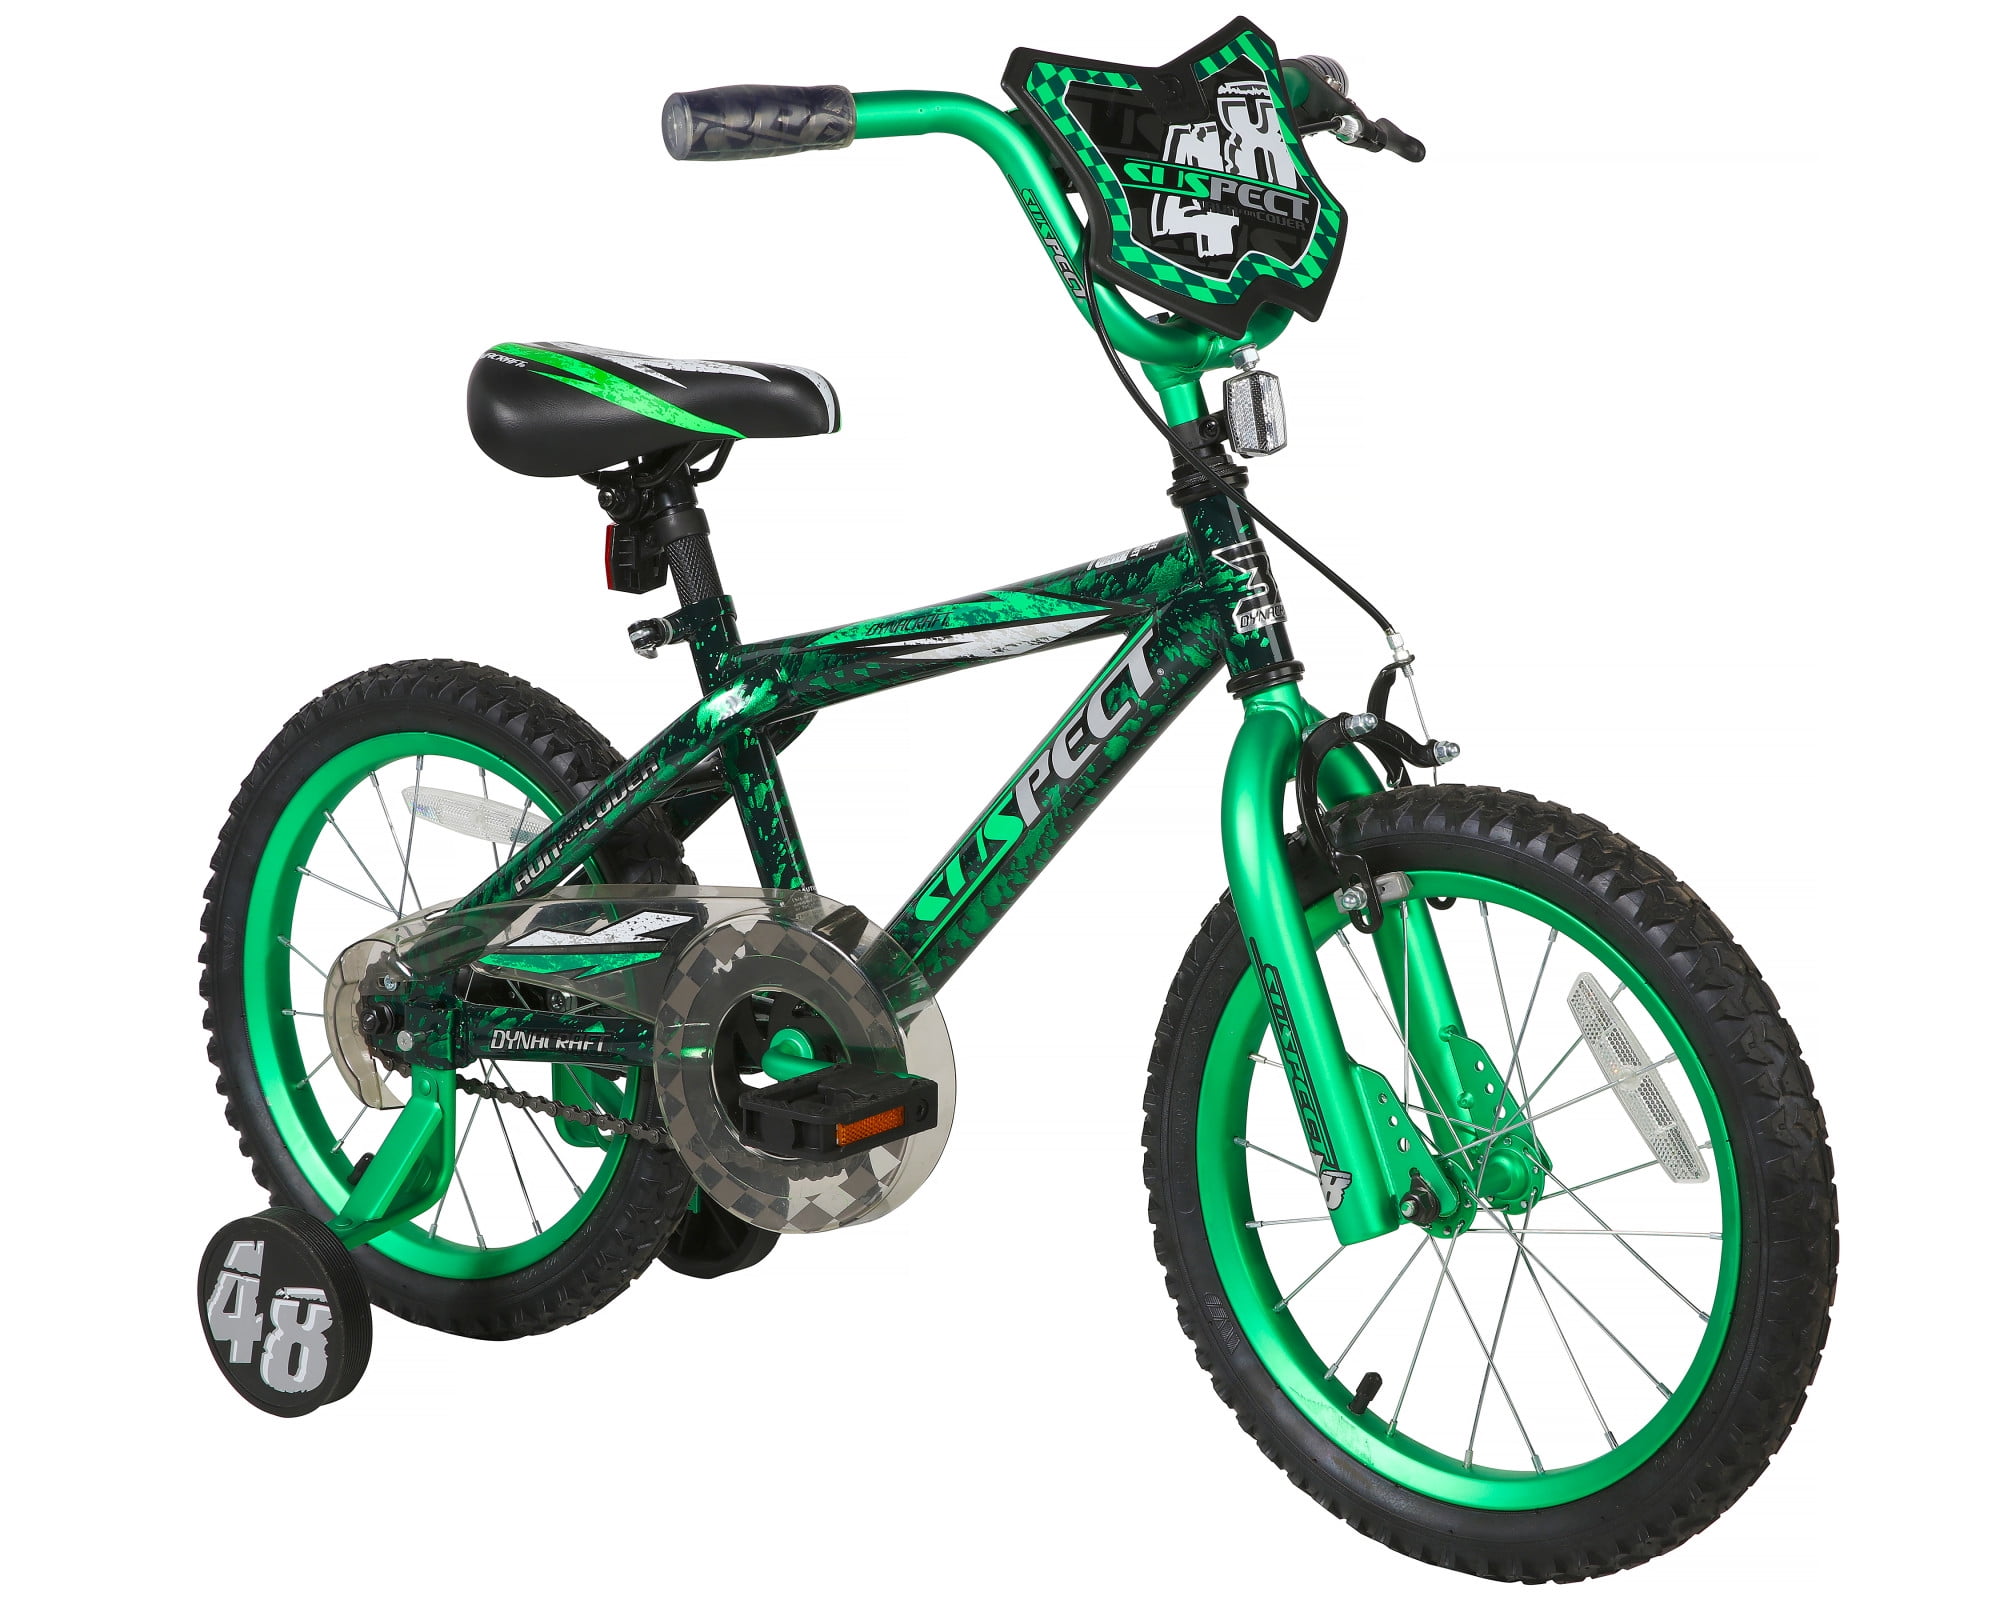 Dynacraft 16 Inch Boys Realtree Bike With Training Wheels for sale online 